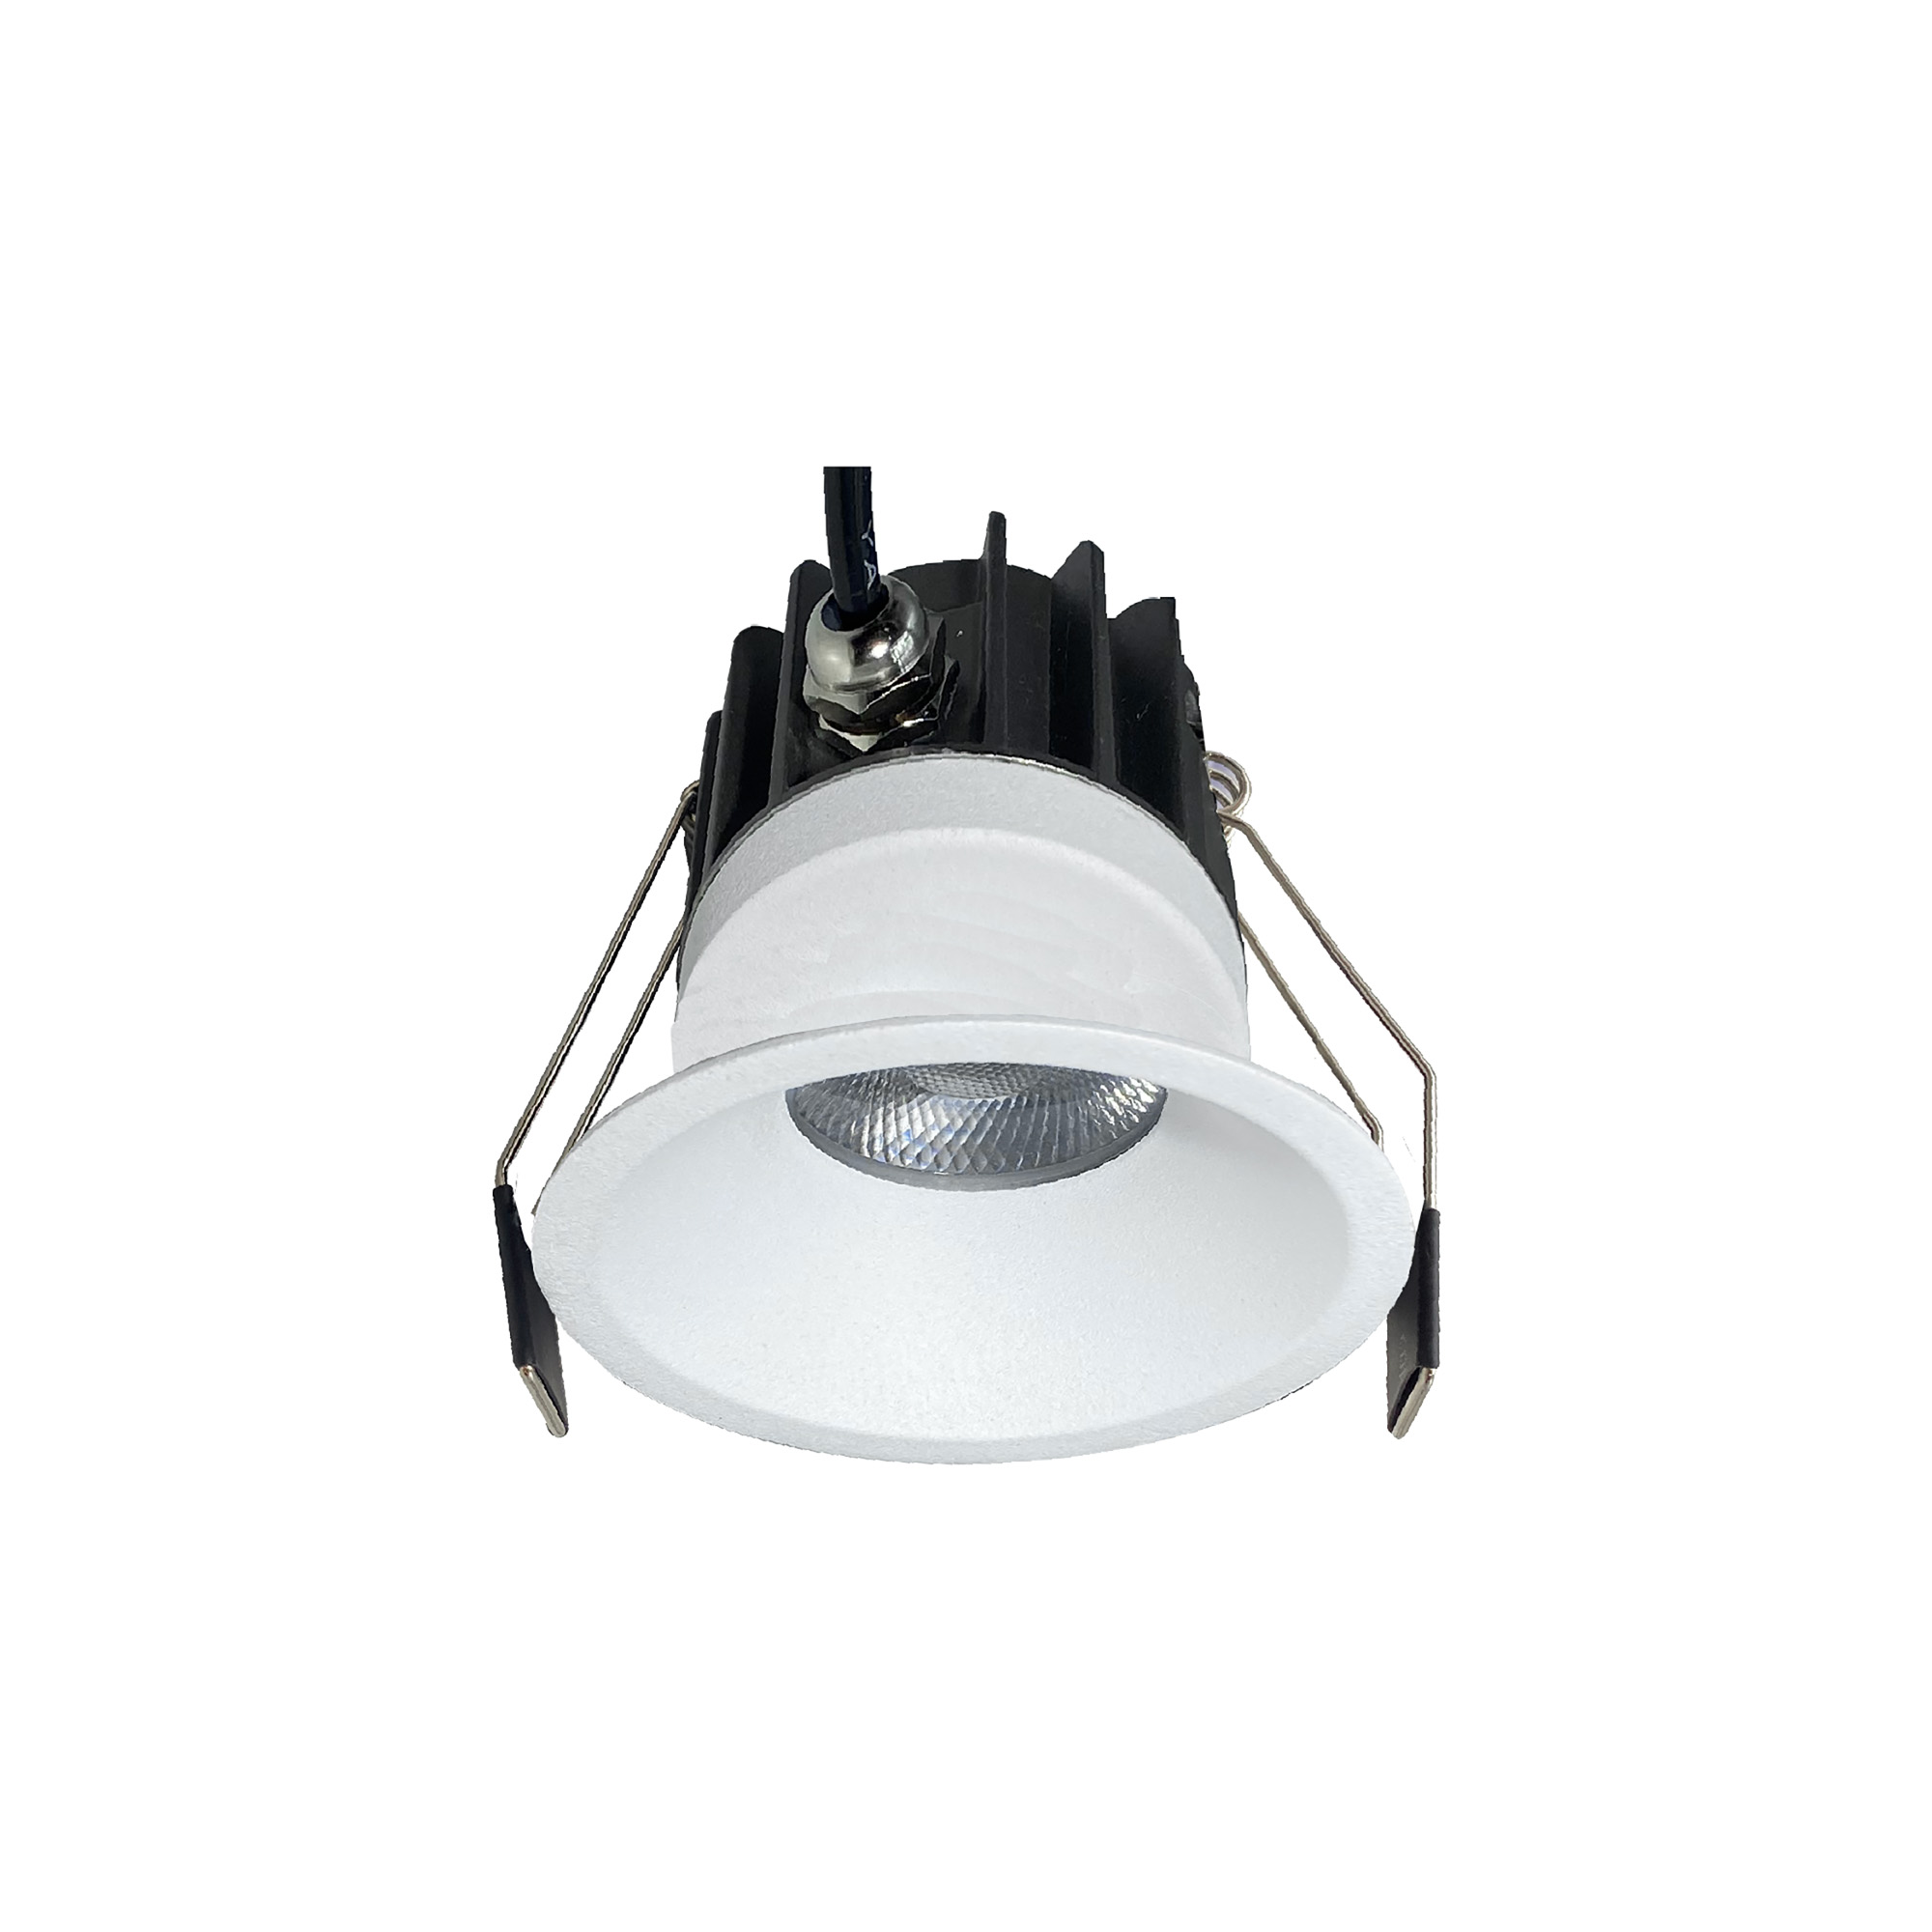 M8766  Rombok Downlight 12W LED; Dimmable CCT LED; Cut Out: 75mm; 1080lm; 36° Deg; IP65 DRIVER INC.; White